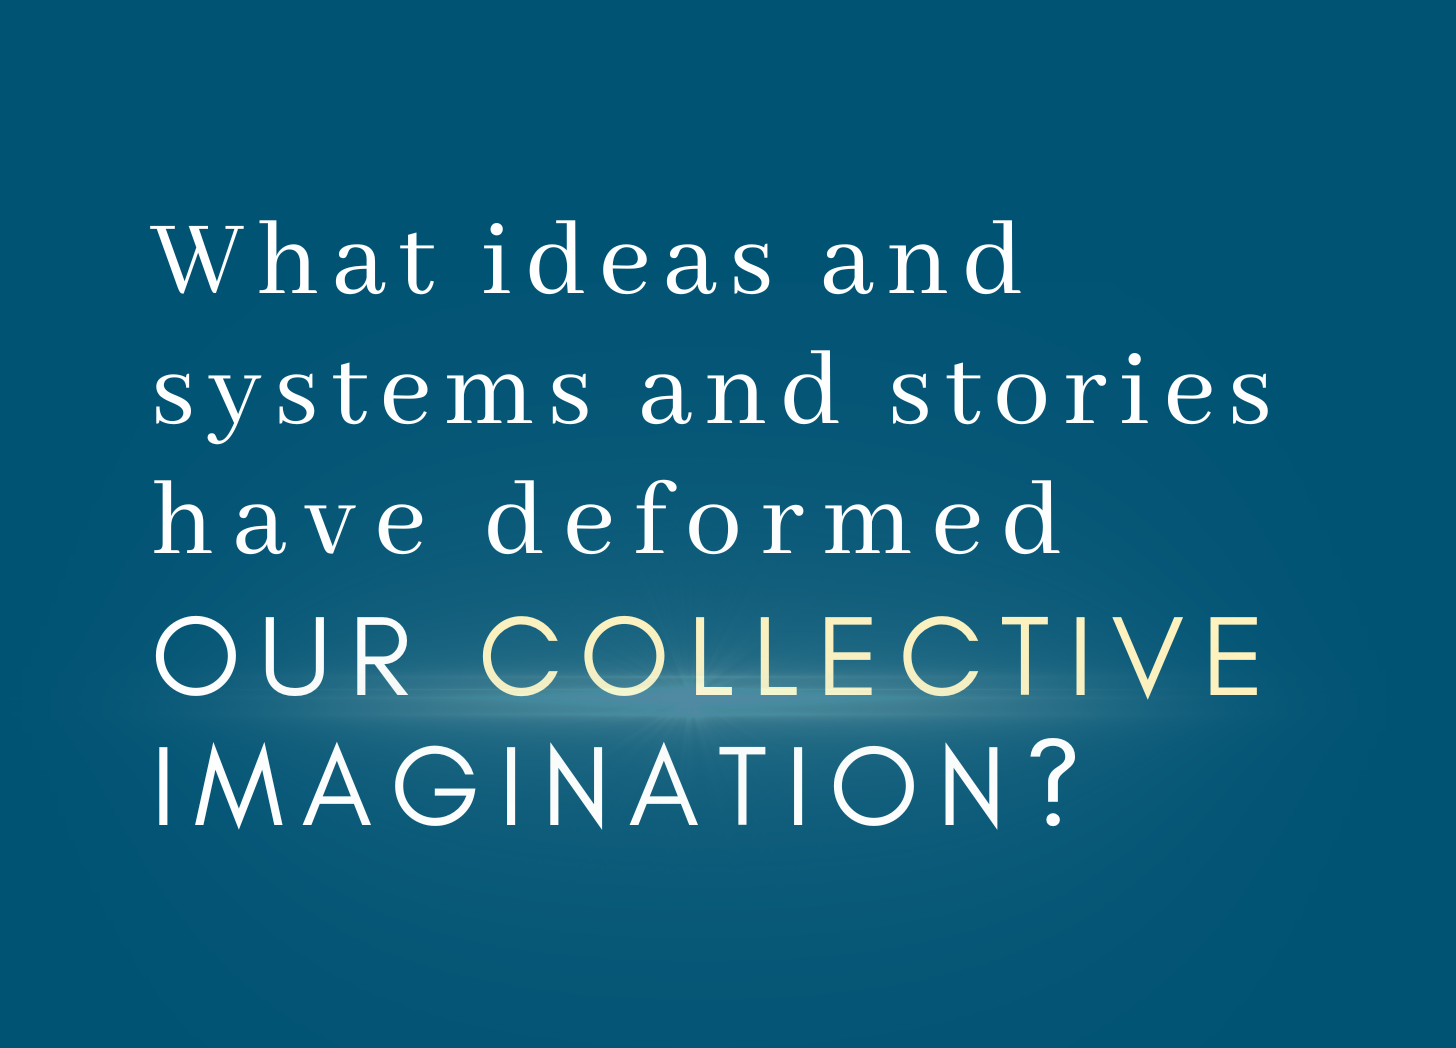 dark blue graphic with text that says: What ideas and systems and stories have deformed our collective imagination